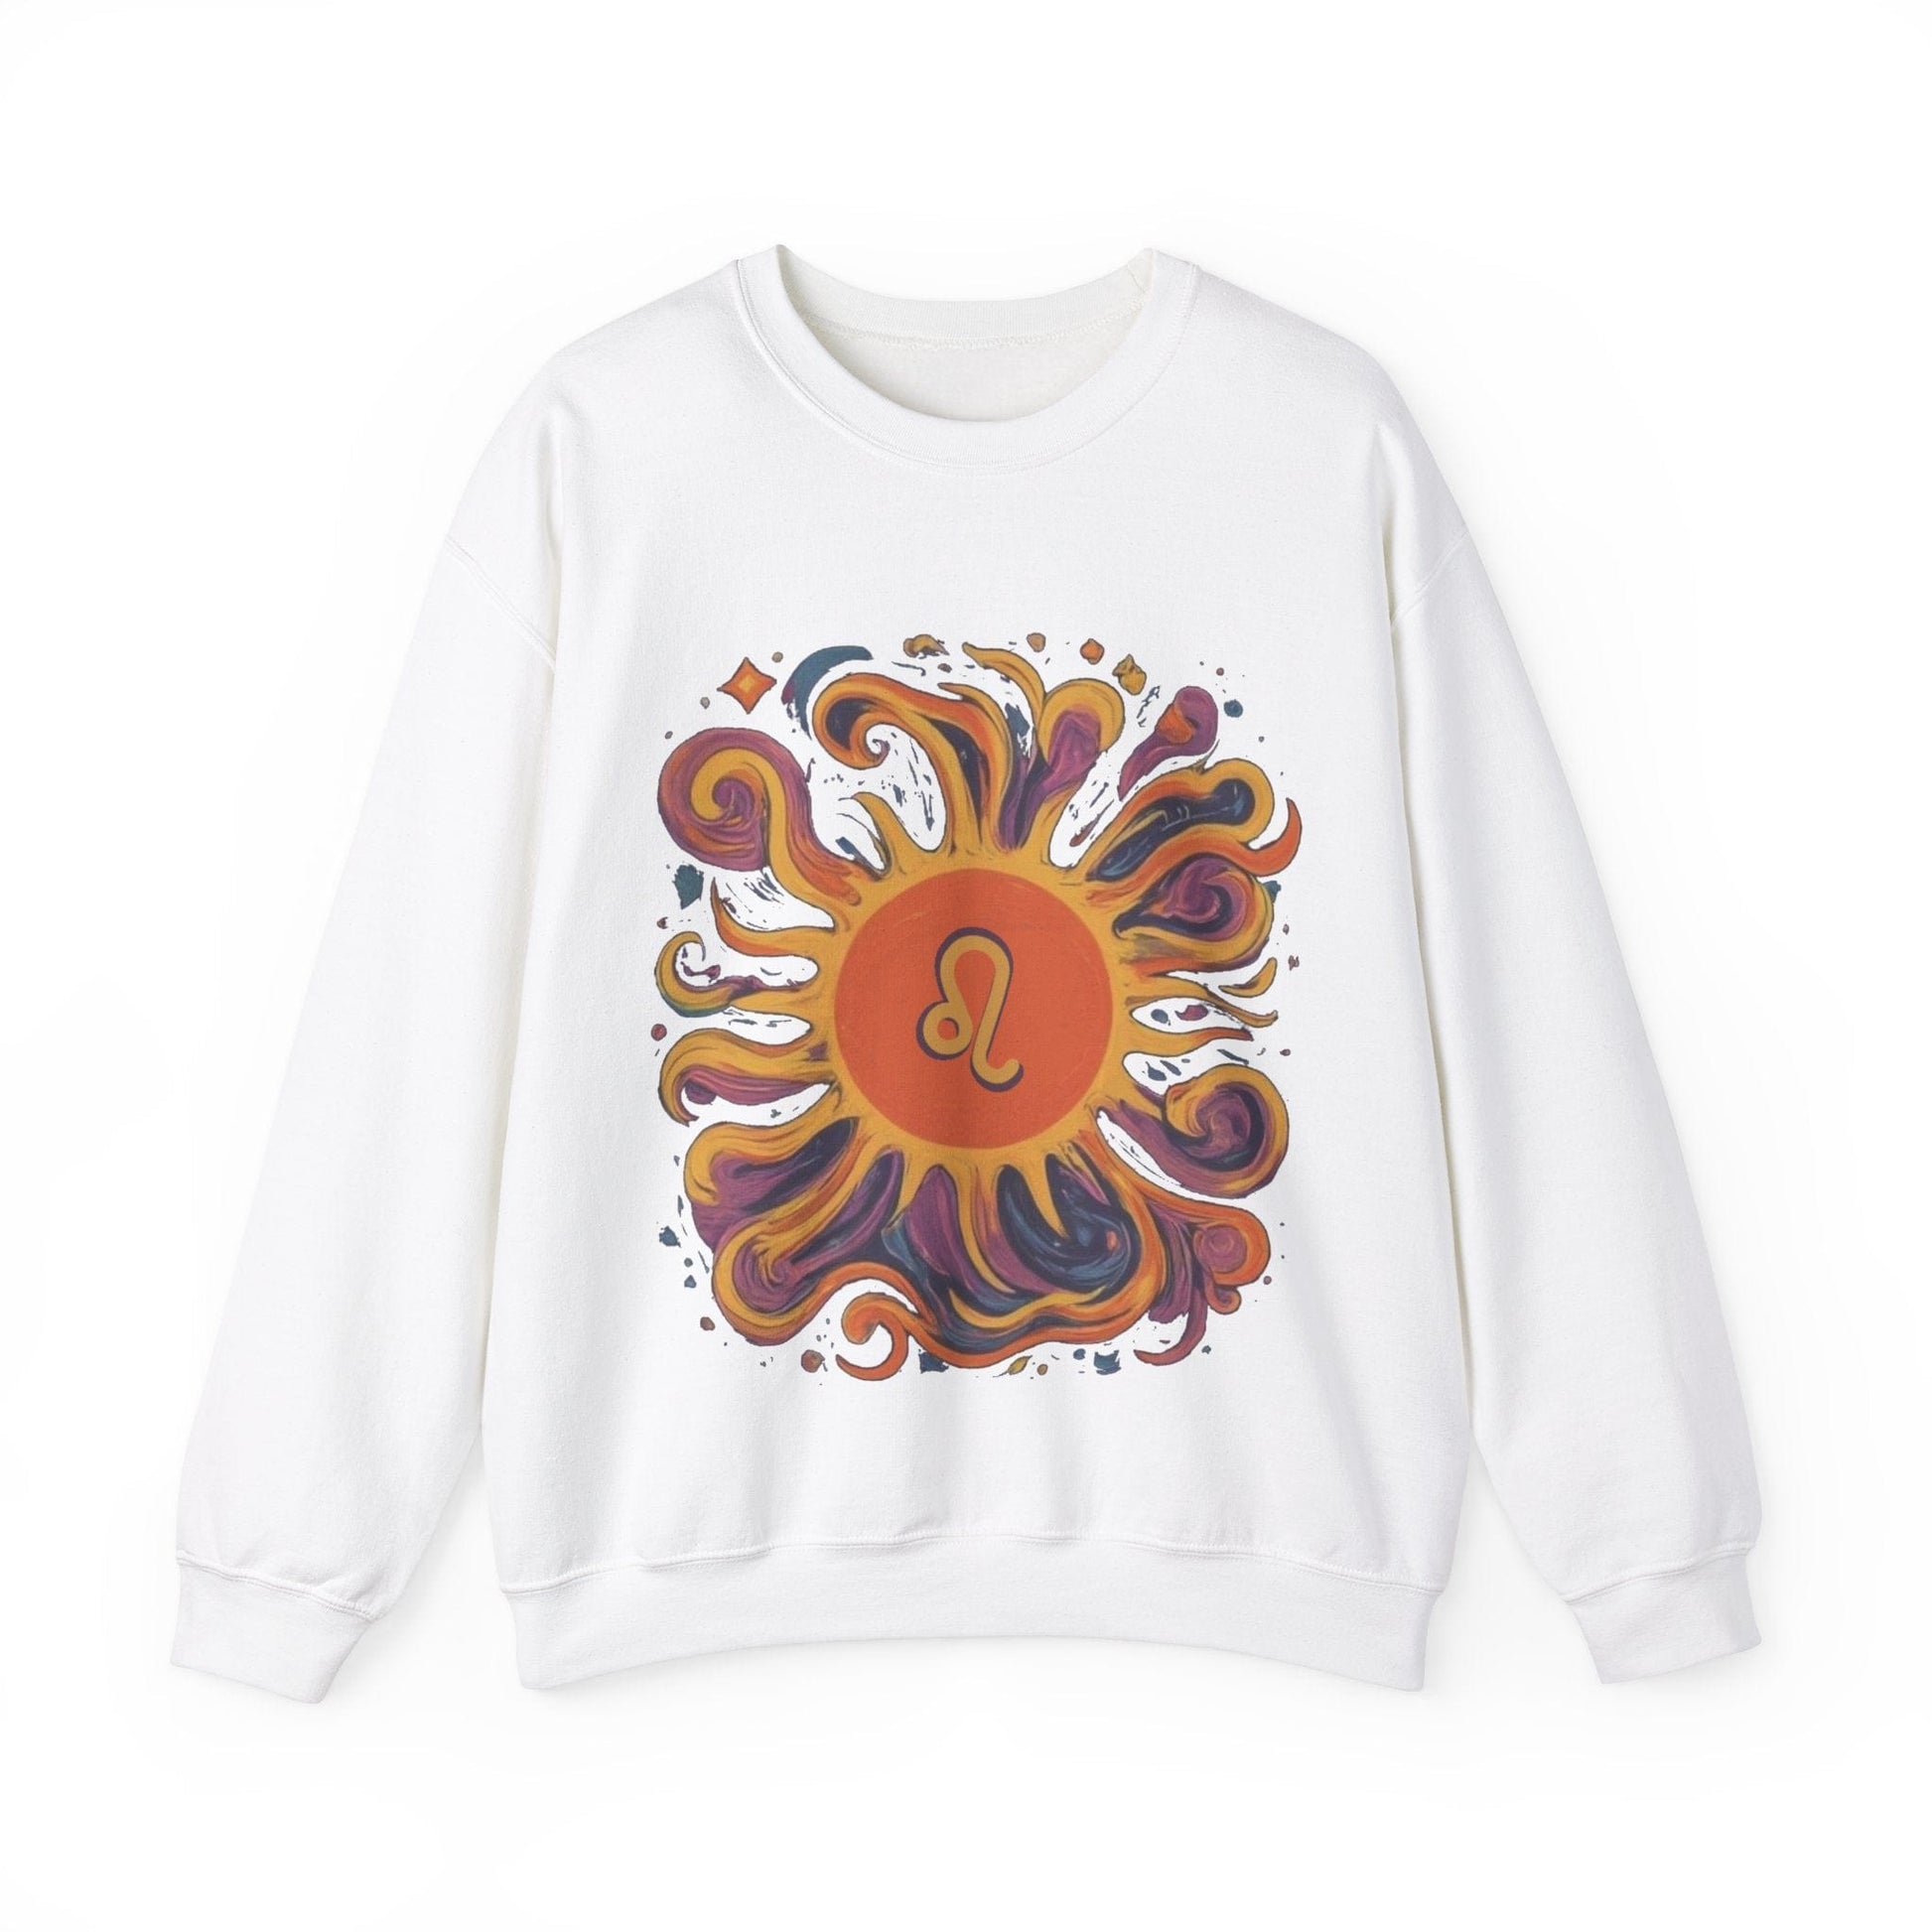 Sweatshirt S / White Leo Majestic Sun Soft Sweater: Royal Warmth for the Lion's Heart